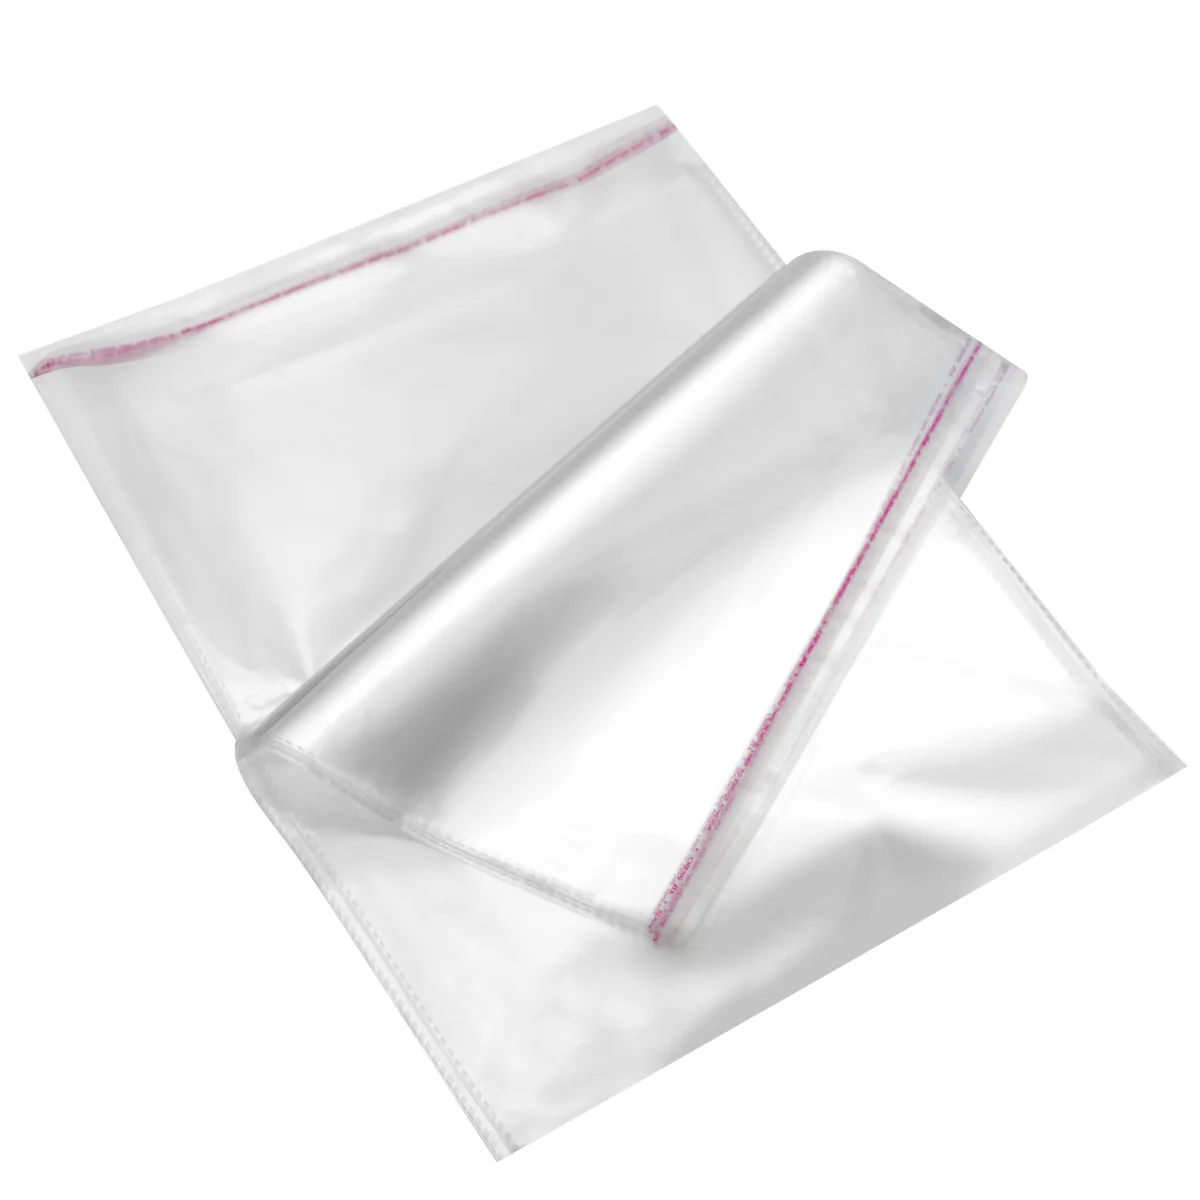 

BESTOMZ 100pcs 30 x 40cm Clear Plastic Cello Bags Grip Peel and Seal Strong Packing Self Adhesive for Bakery Soap Cookie